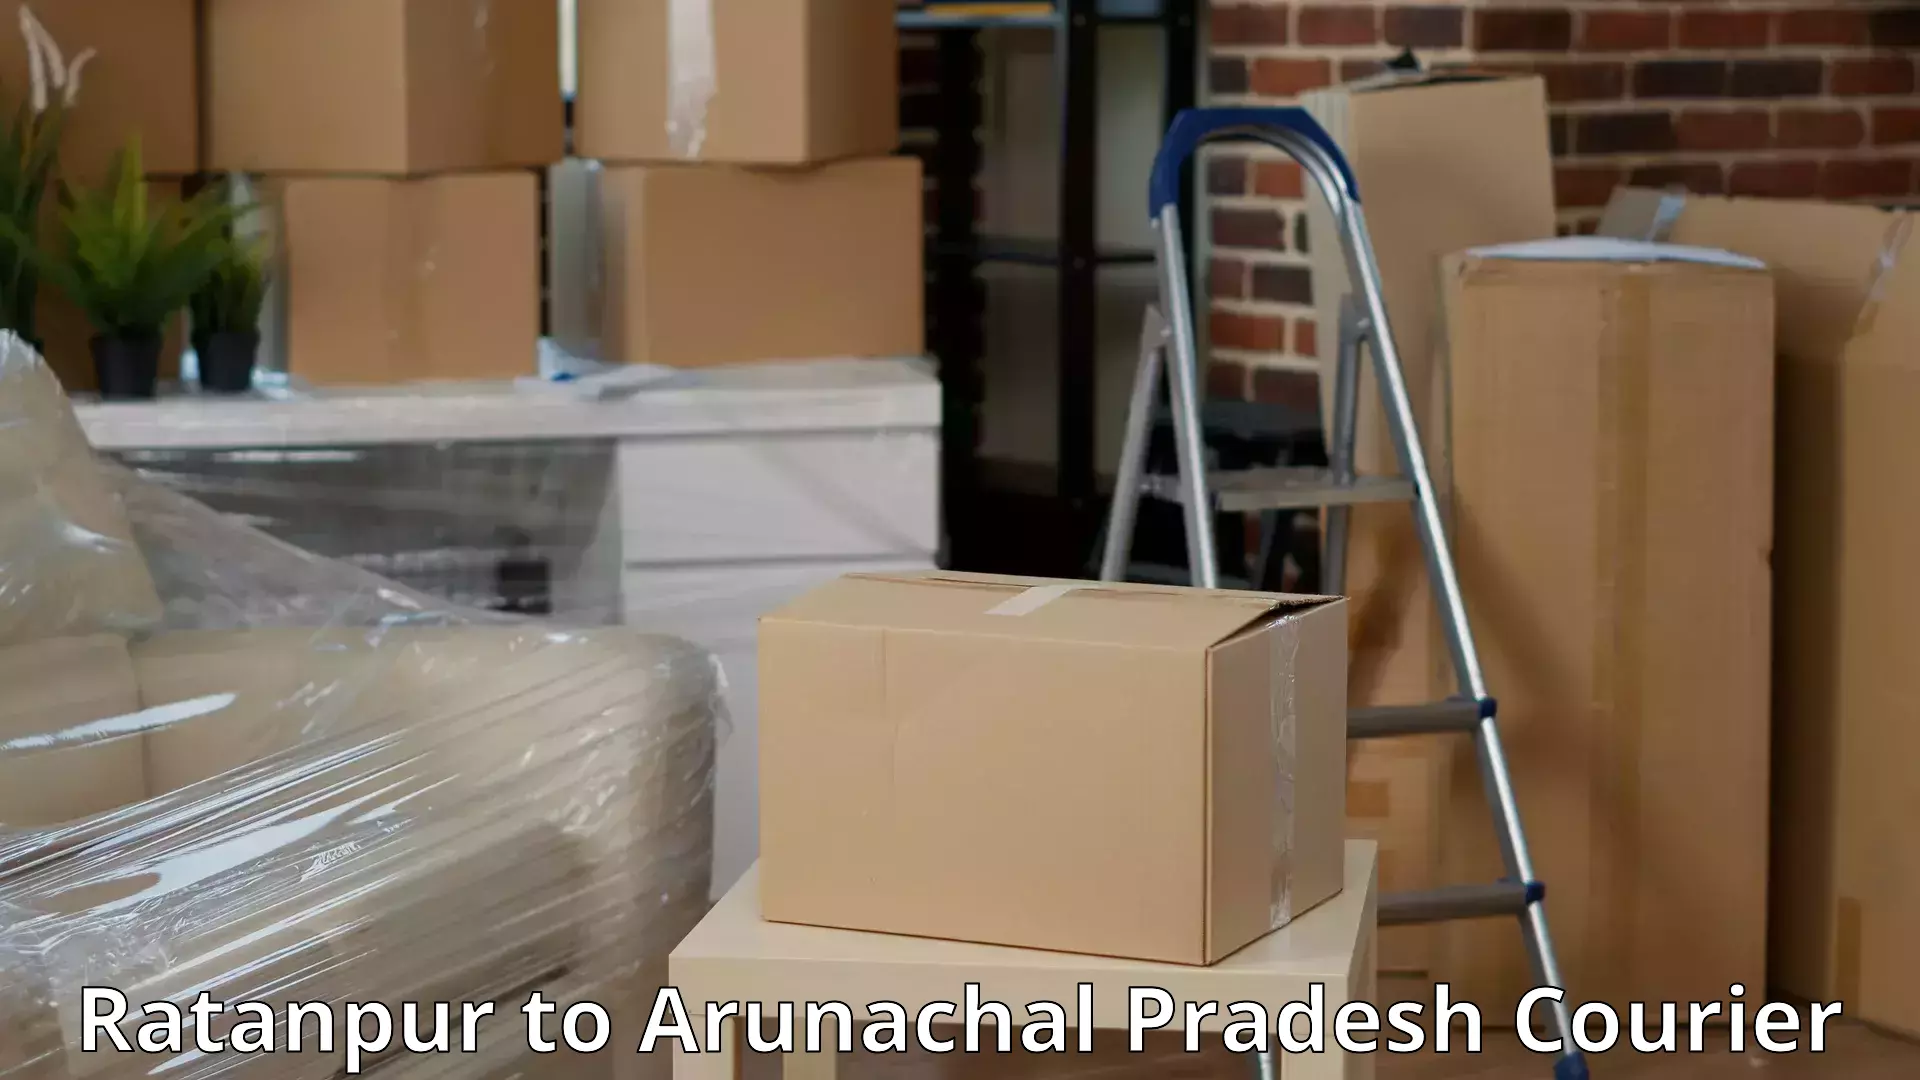 Professional movers and packers in Ratanpur to Namsai